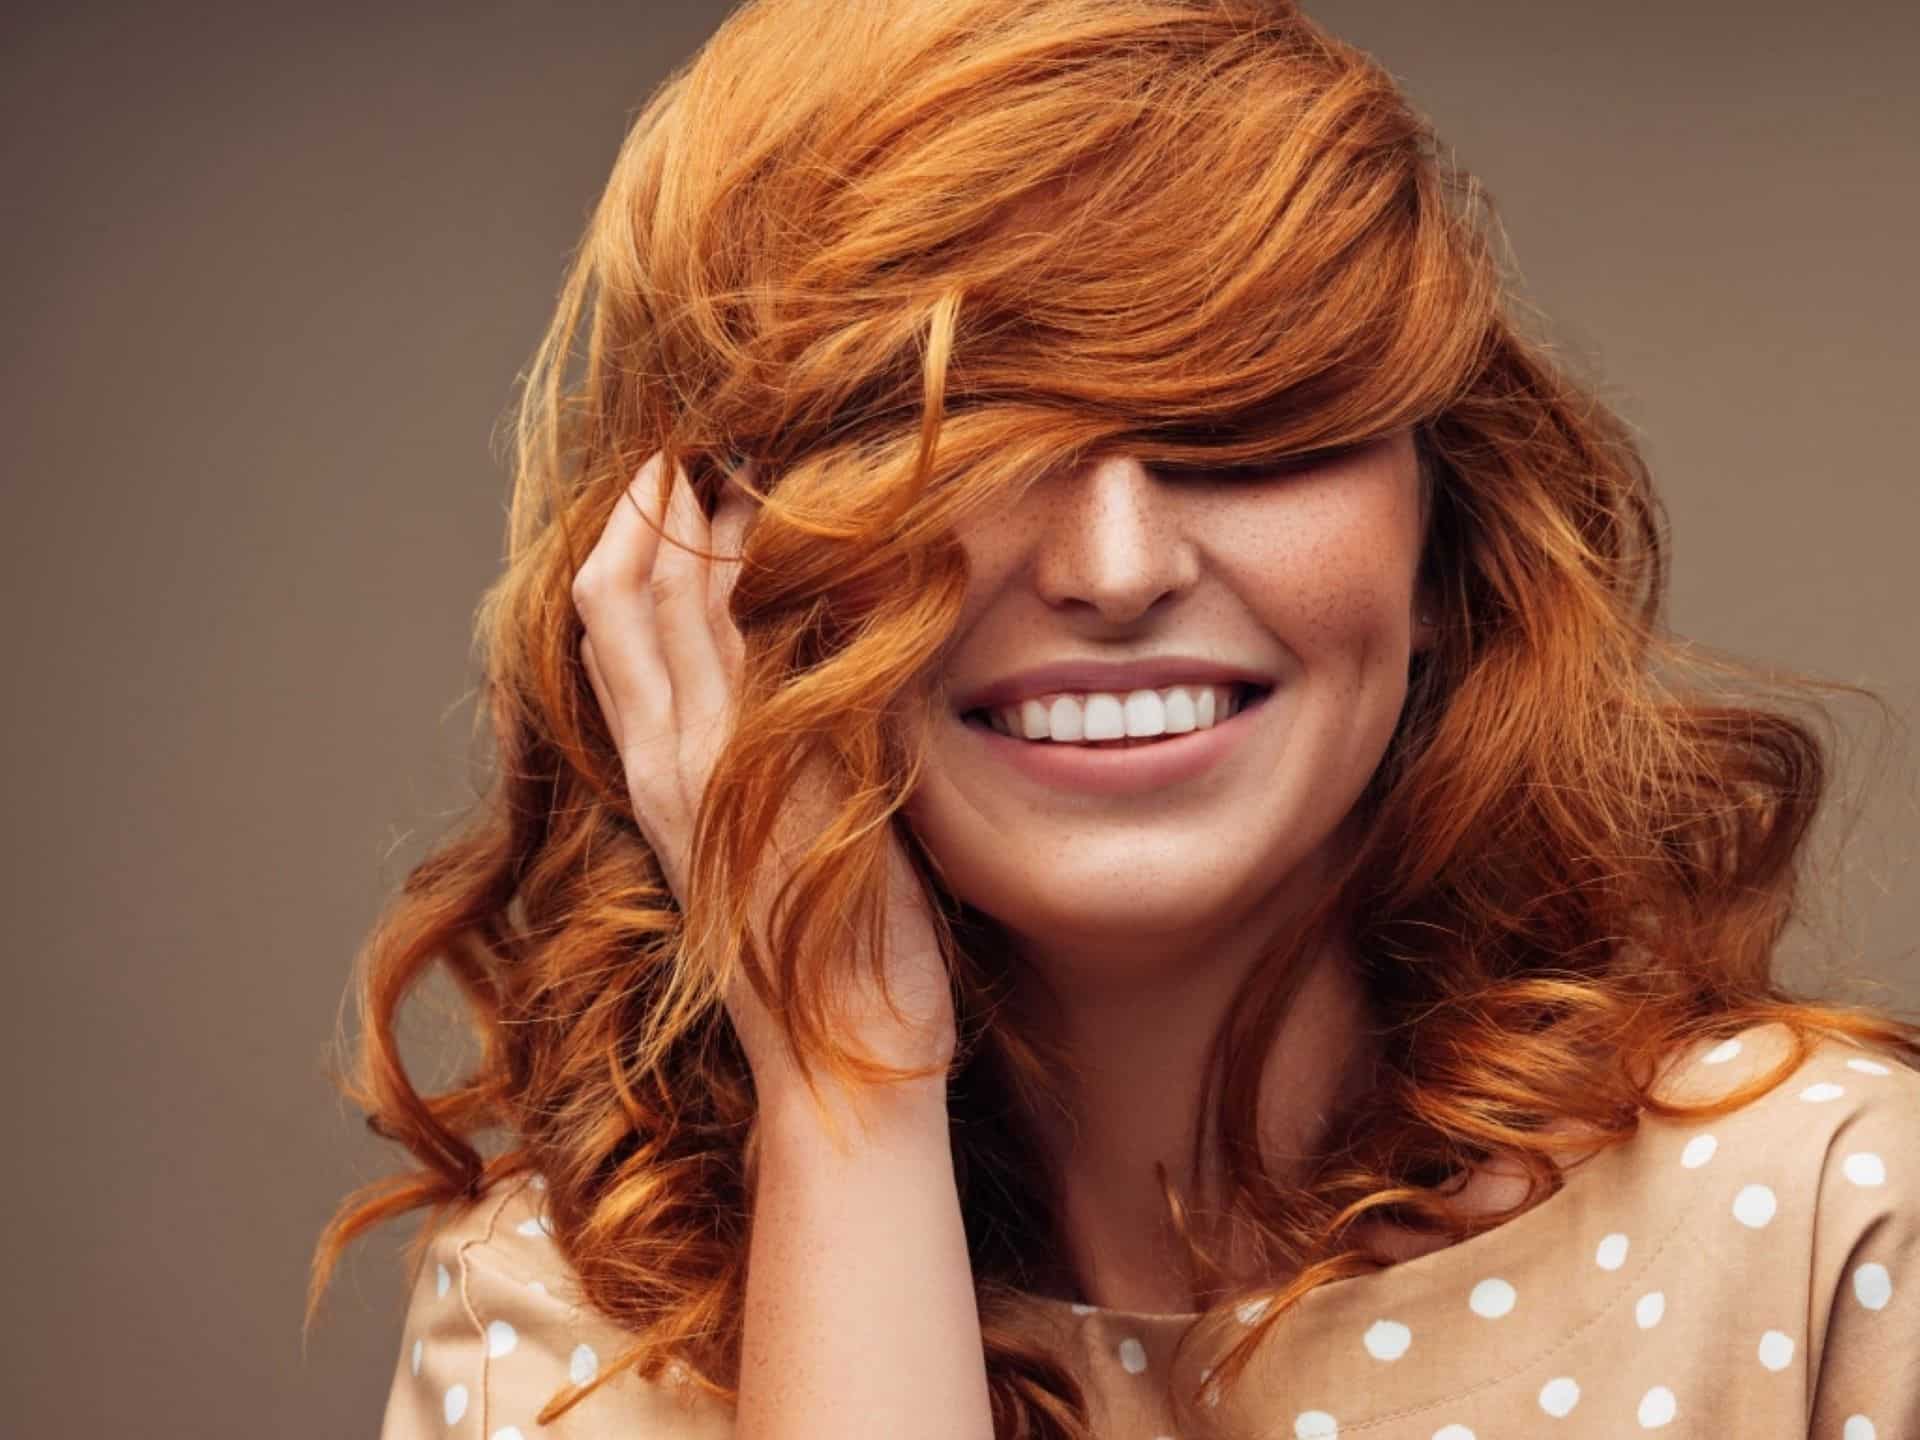 laughing woman with orange hair and freckles